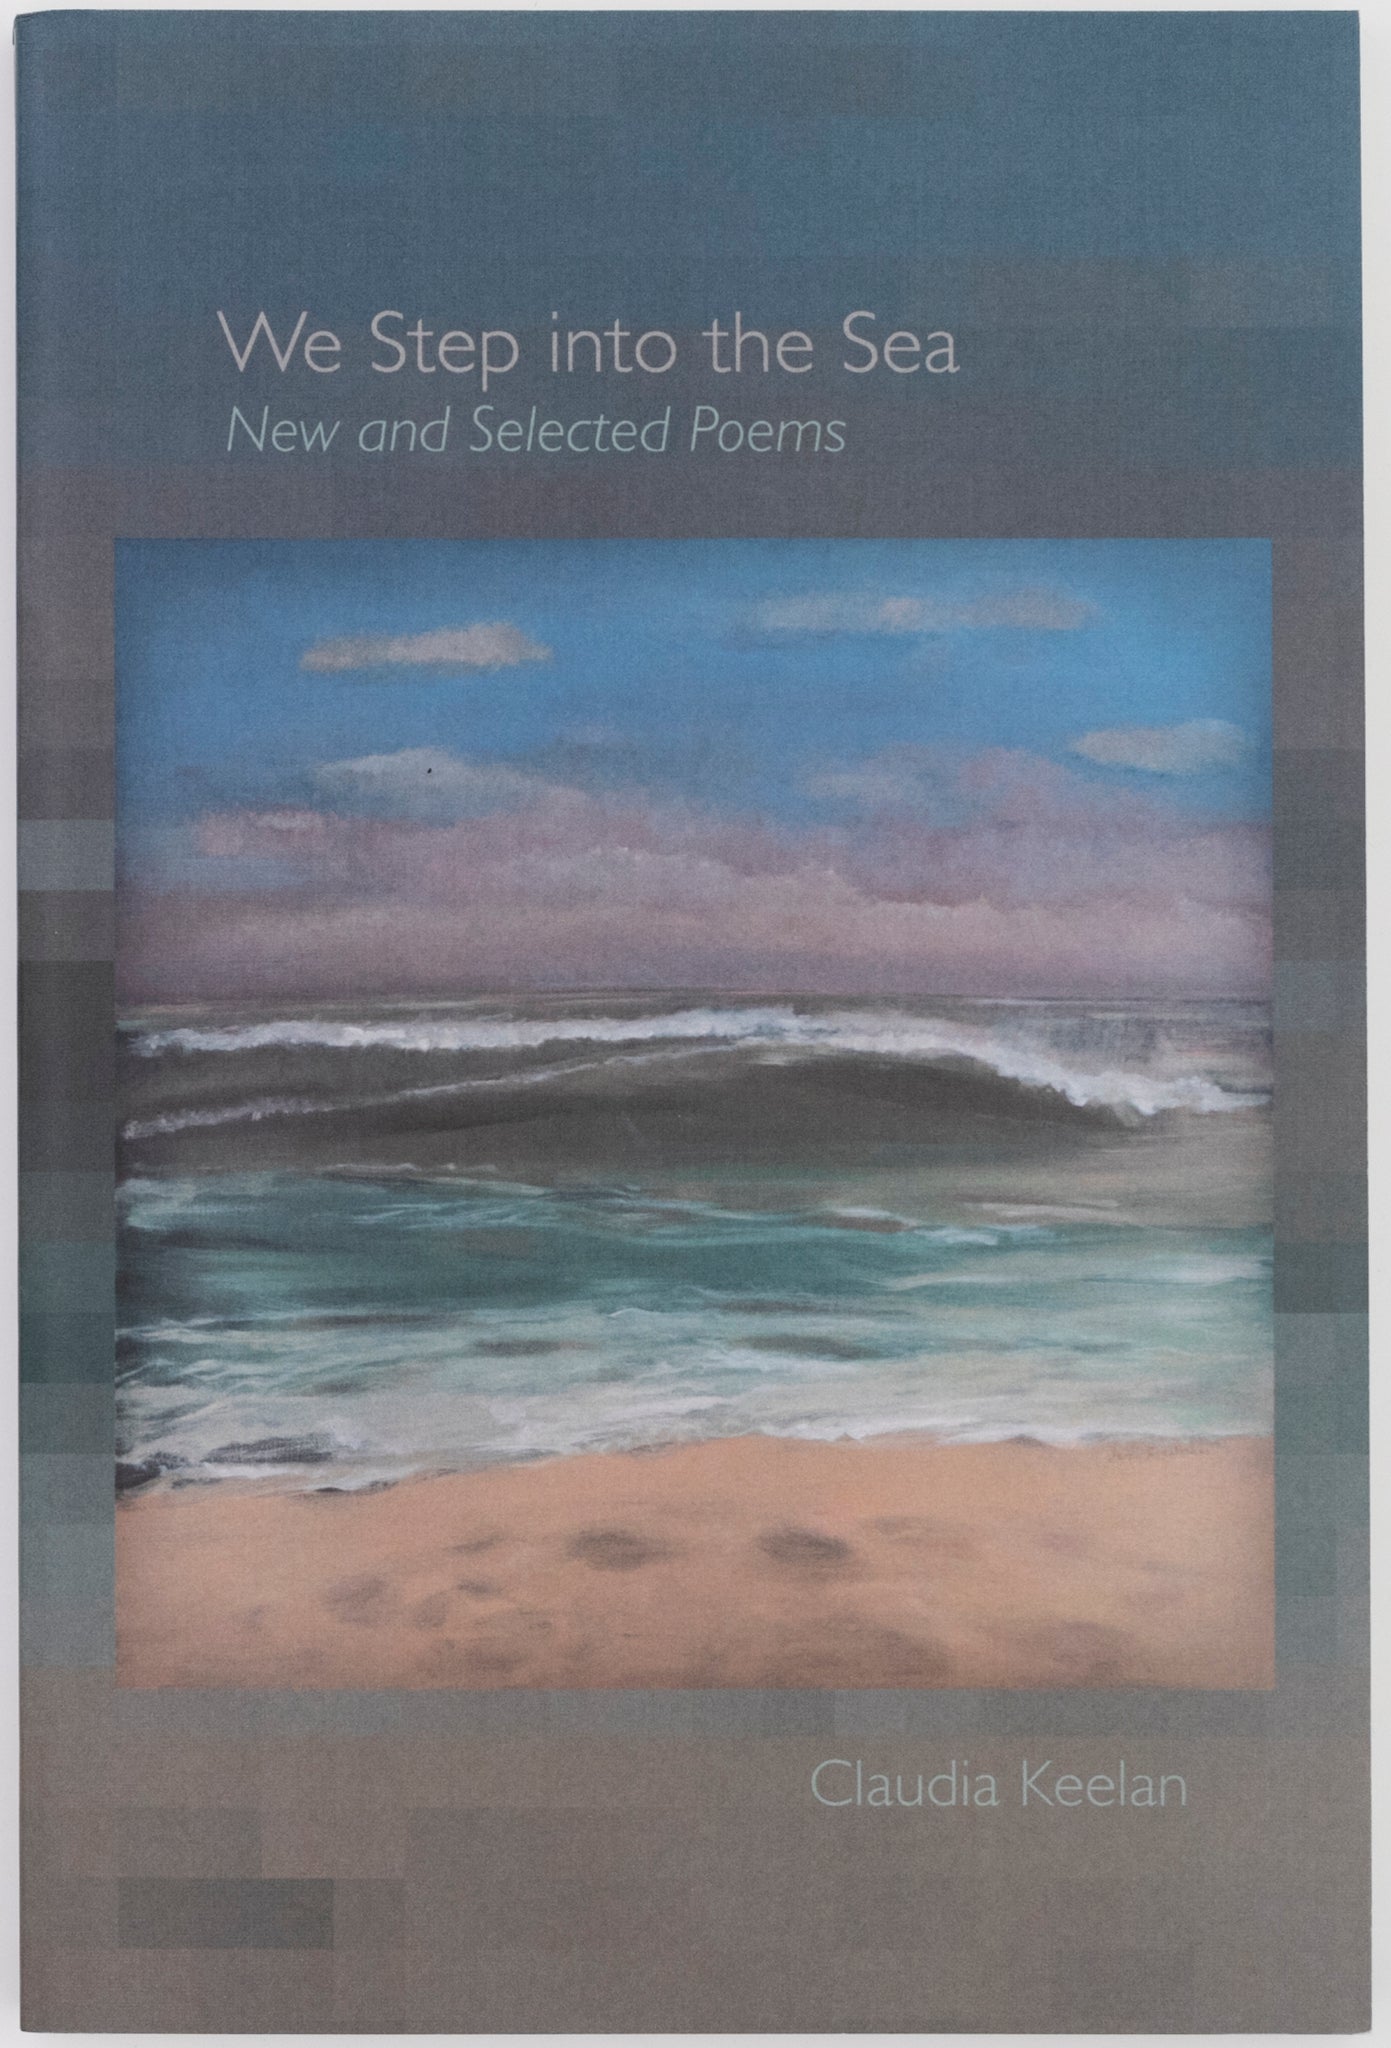 We Step into the Sea: New and Selected Poems